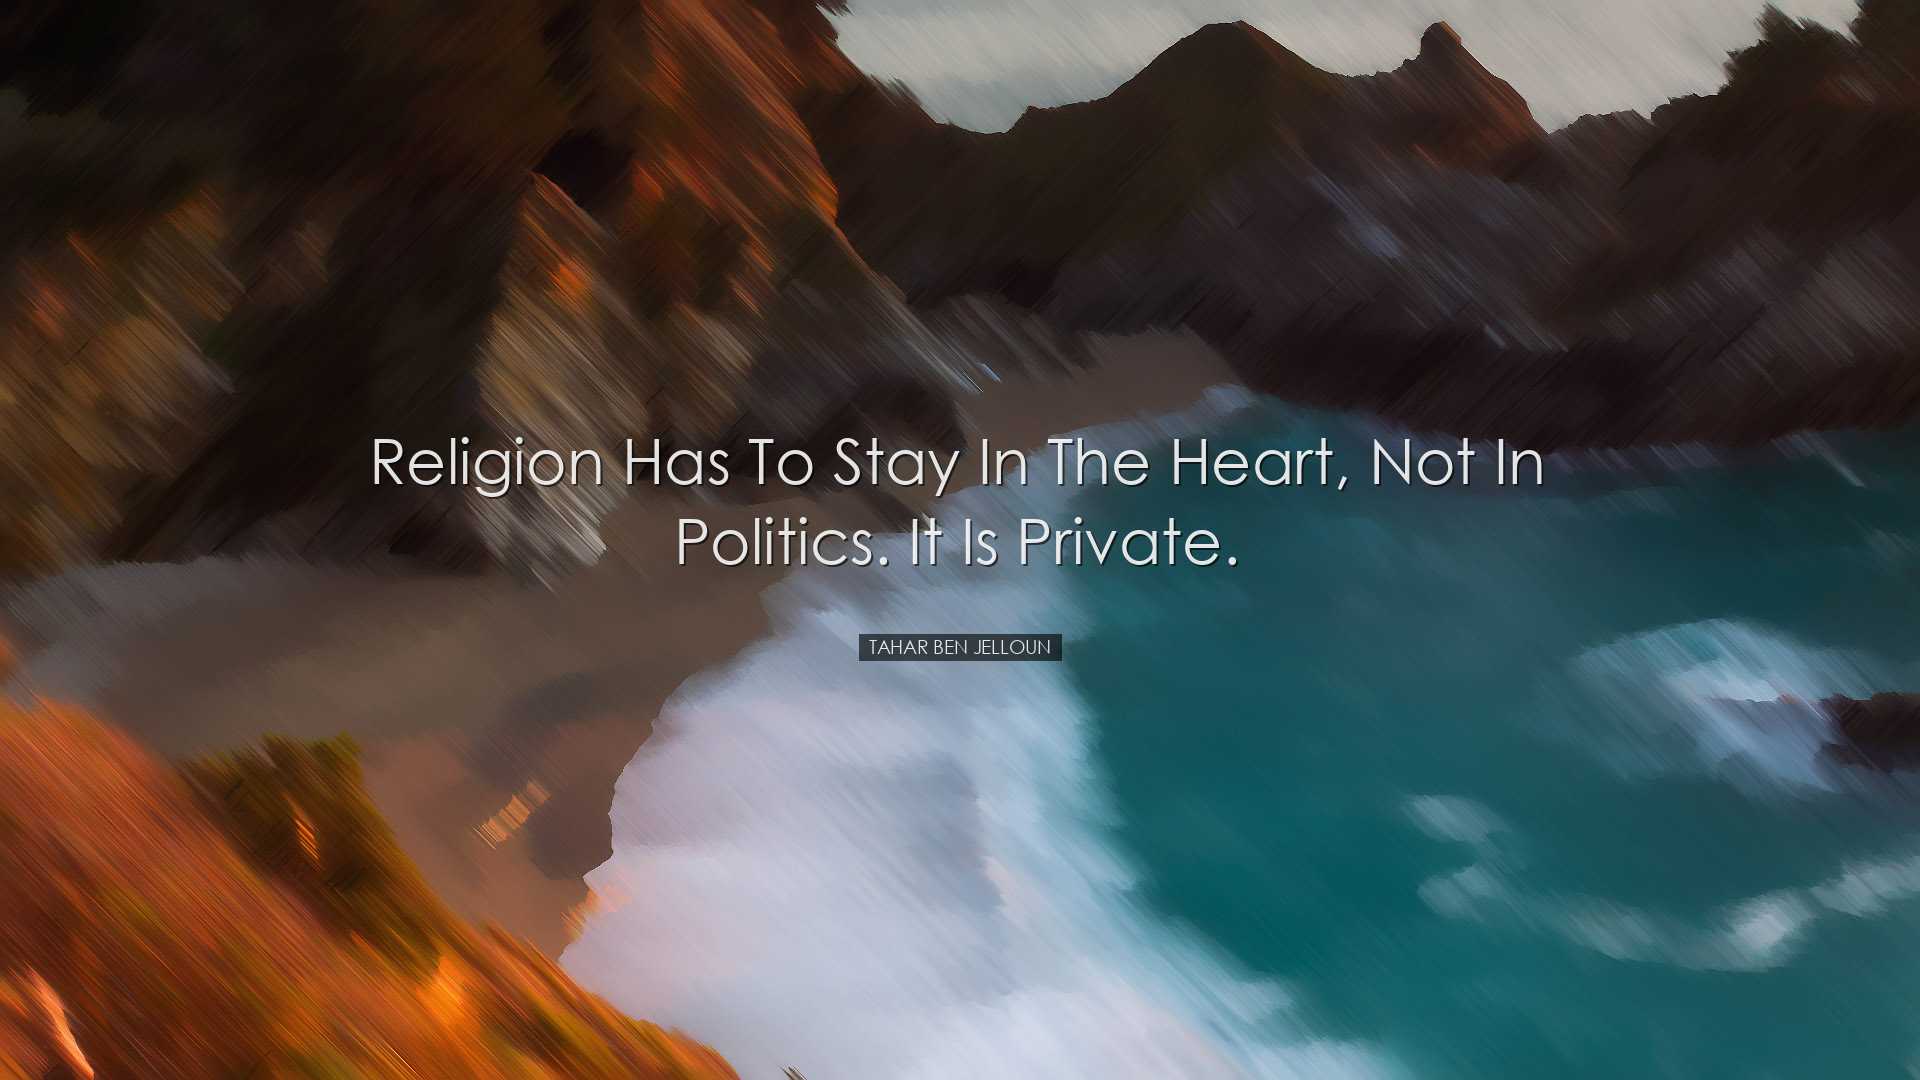 Religion has to stay in the heart, not in politics. It is private.